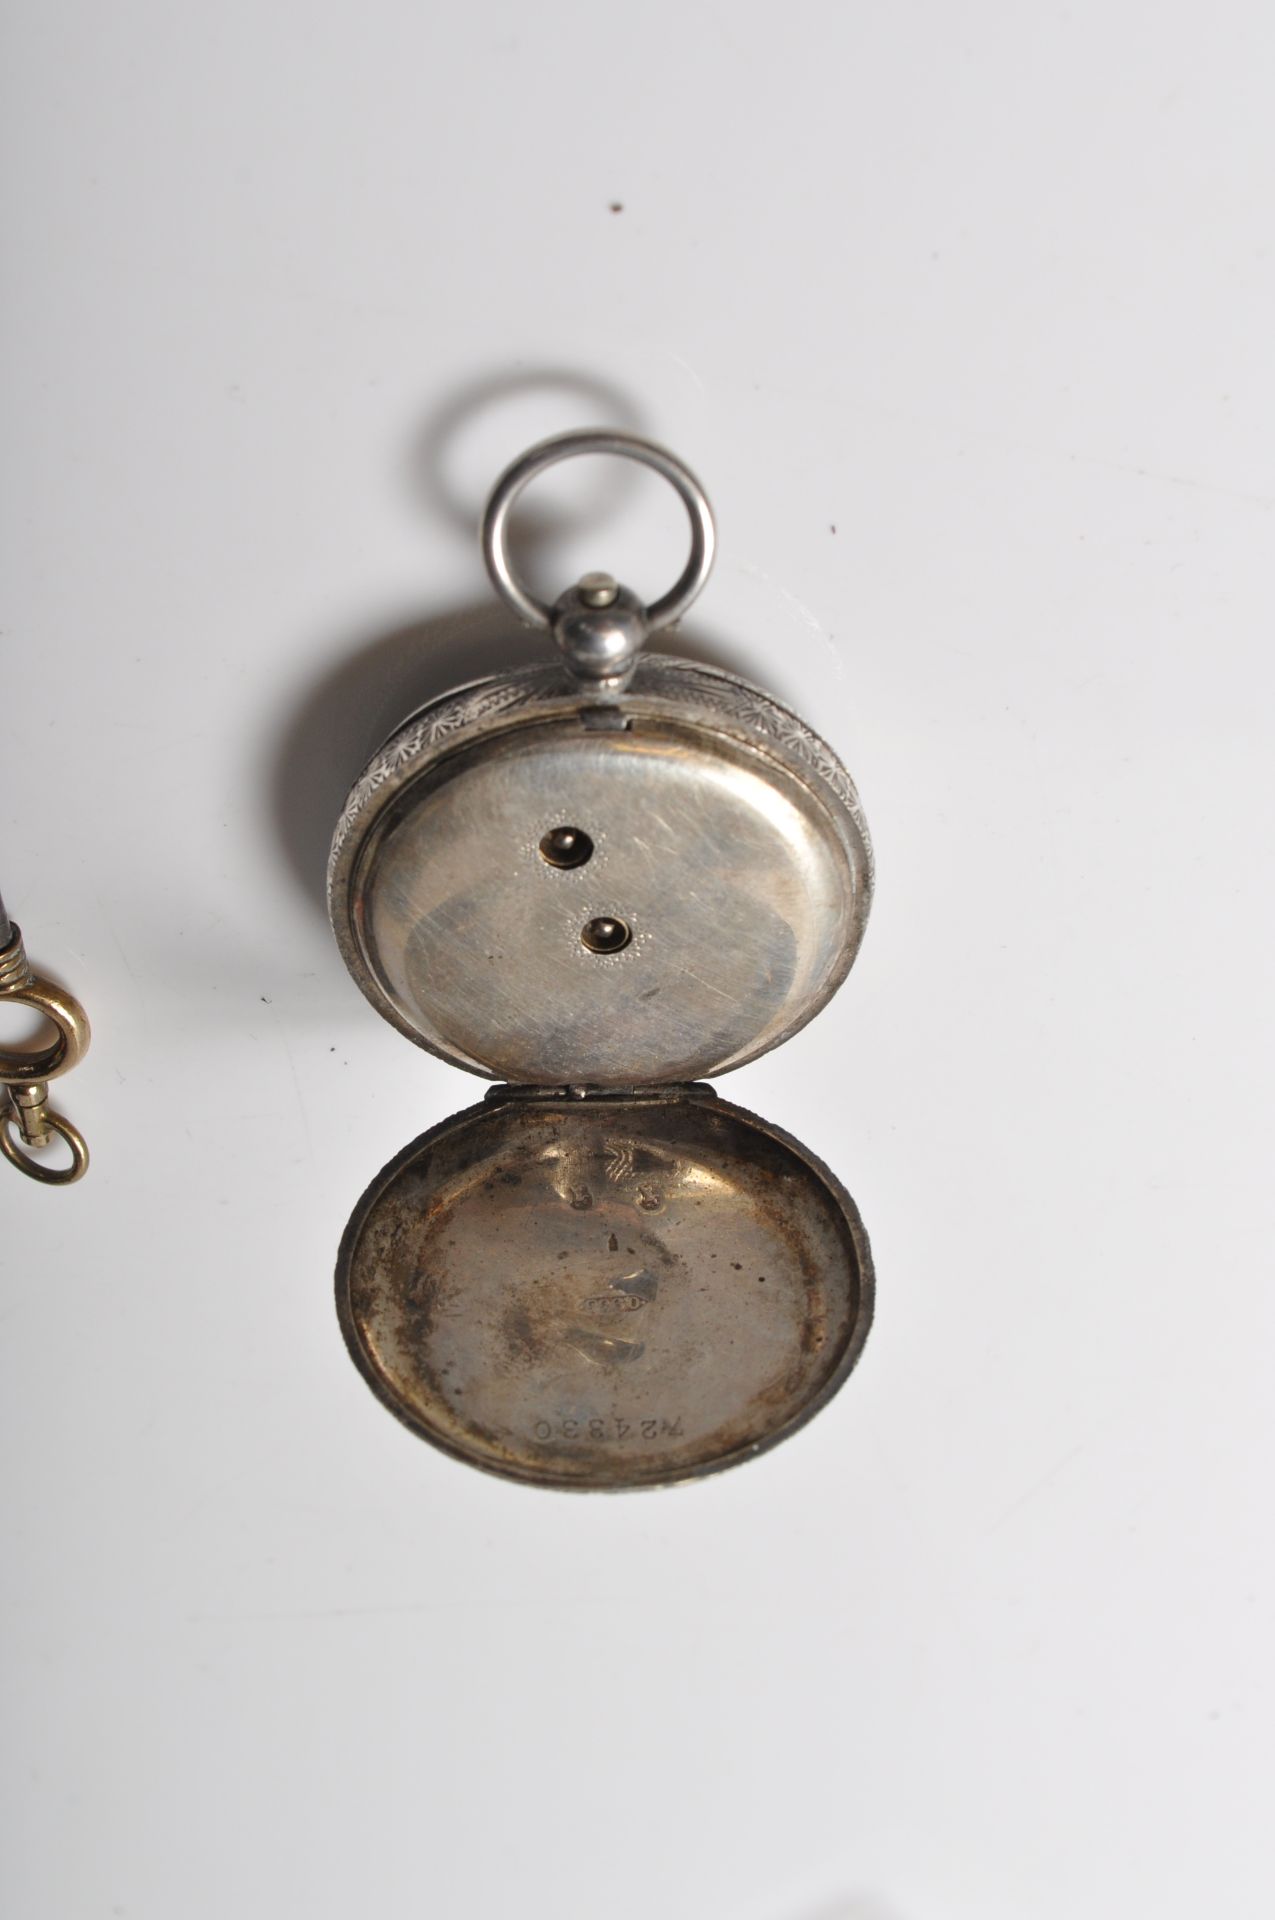 LADIES SILVER FOB WATCH AND KEY - Image 4 of 6